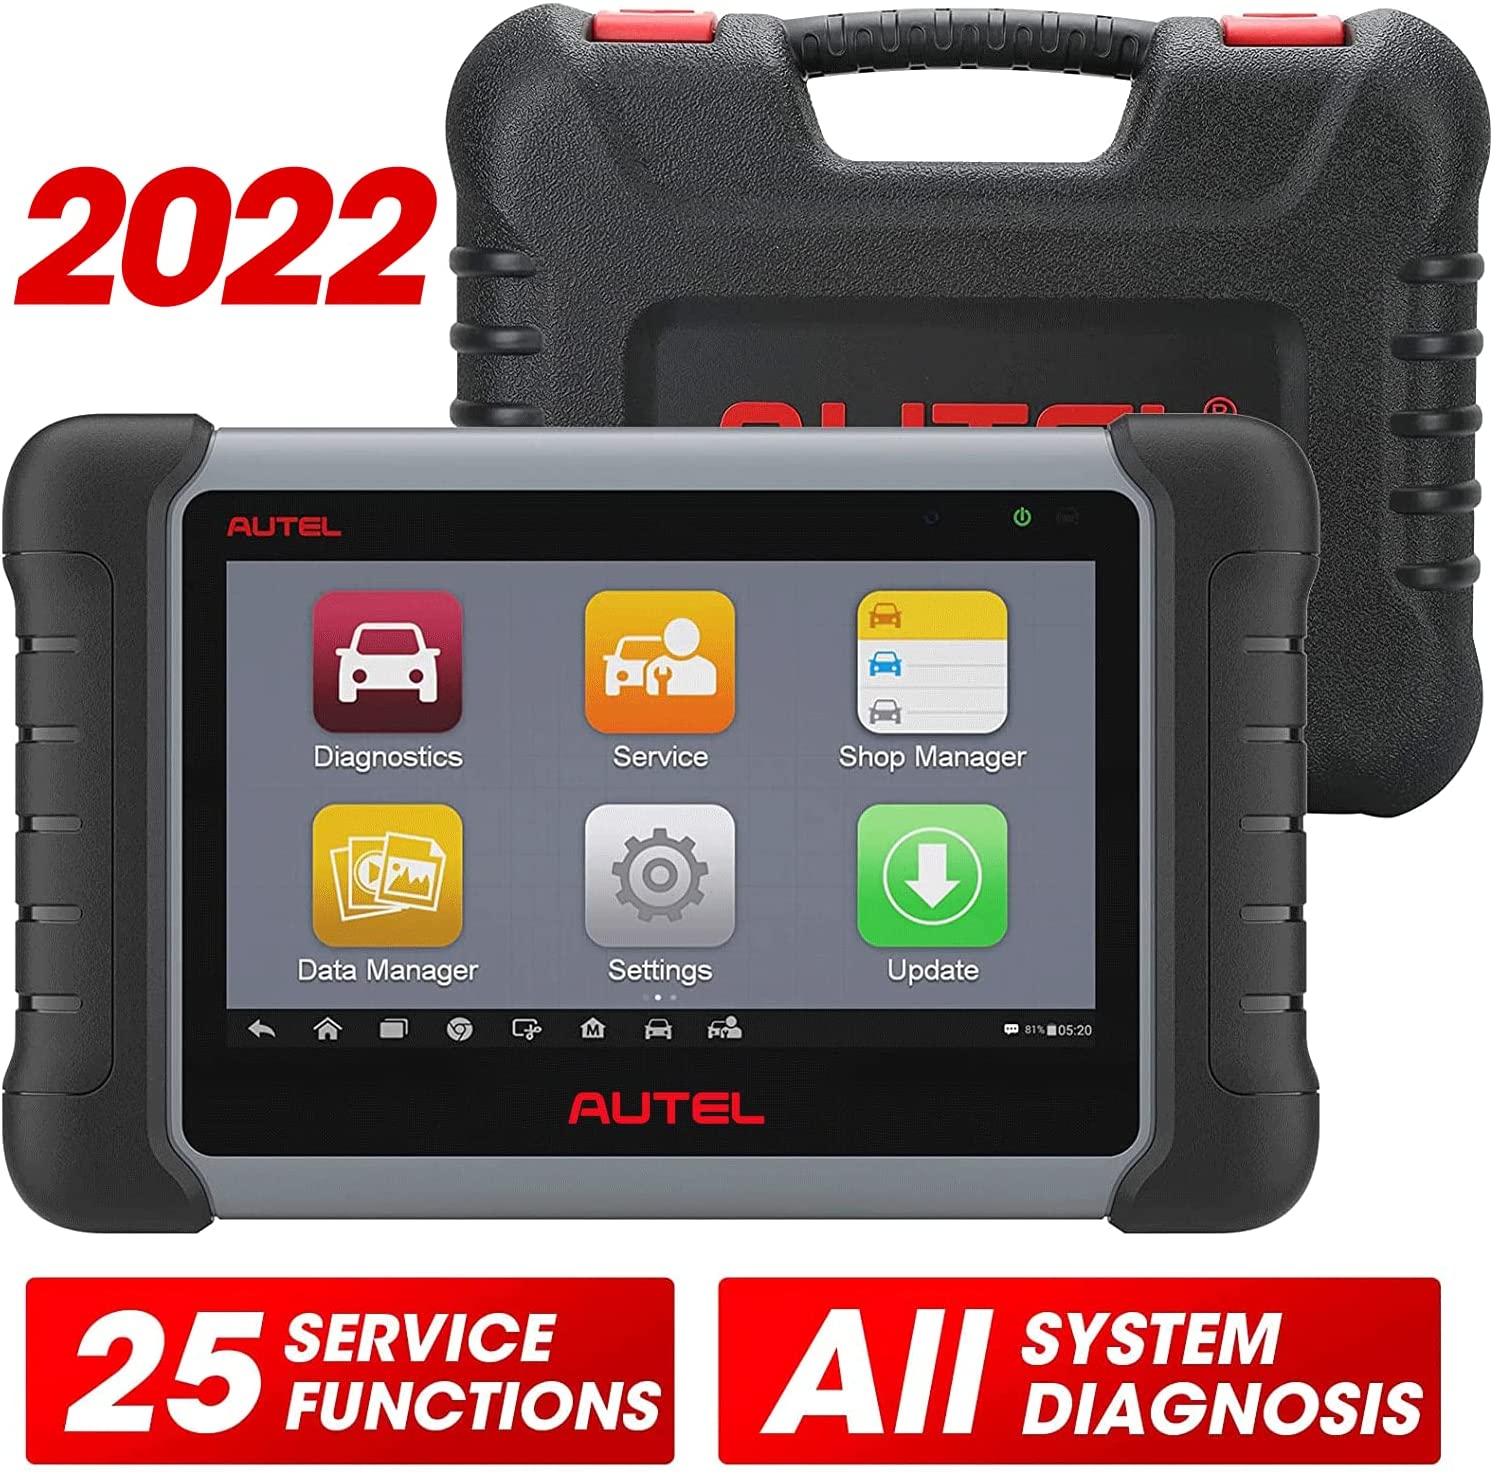 Autel OBD2 Scanner MK808 Car Diagnostic Scan Tool with All System Diagnosis, 25+ Maintenance Functions Services